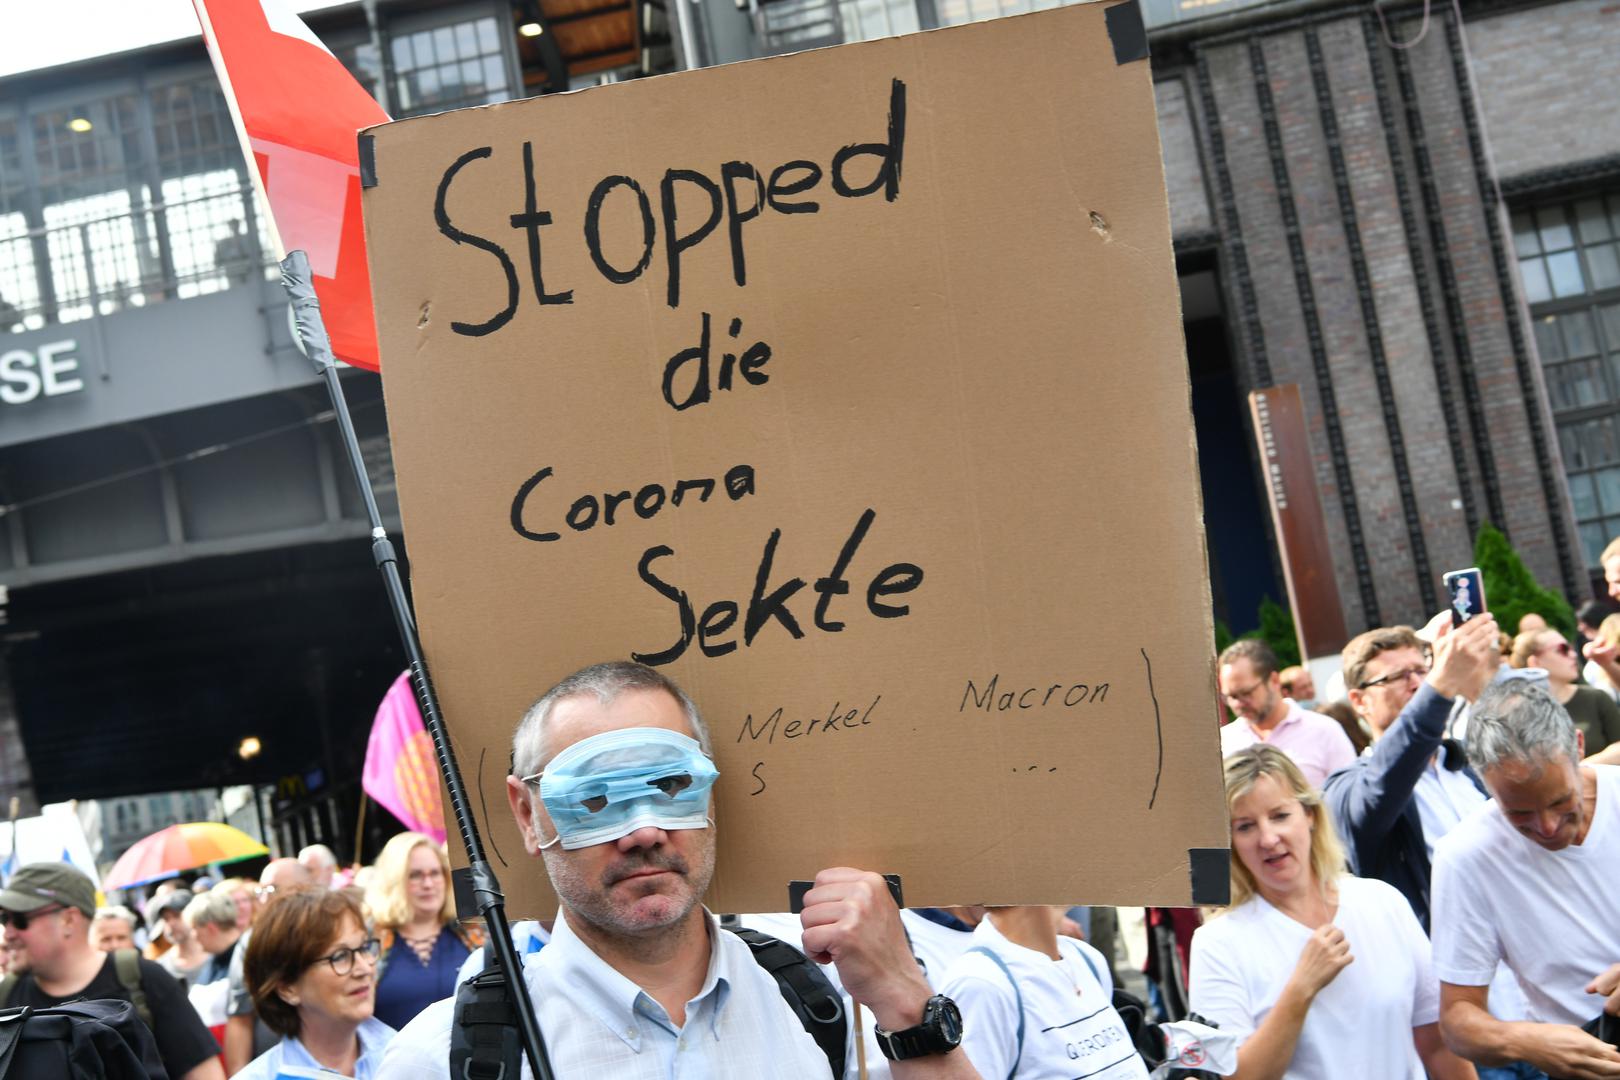 29 August 2020, Berlin: A participant with a mouth guard over his eyes and the sign "Stopped the Corona Sect" is standing in Friedrichstraße during a demonstration against the Corona measures. Photo: Paul Zinken/dpa /DPA/PIXSELL